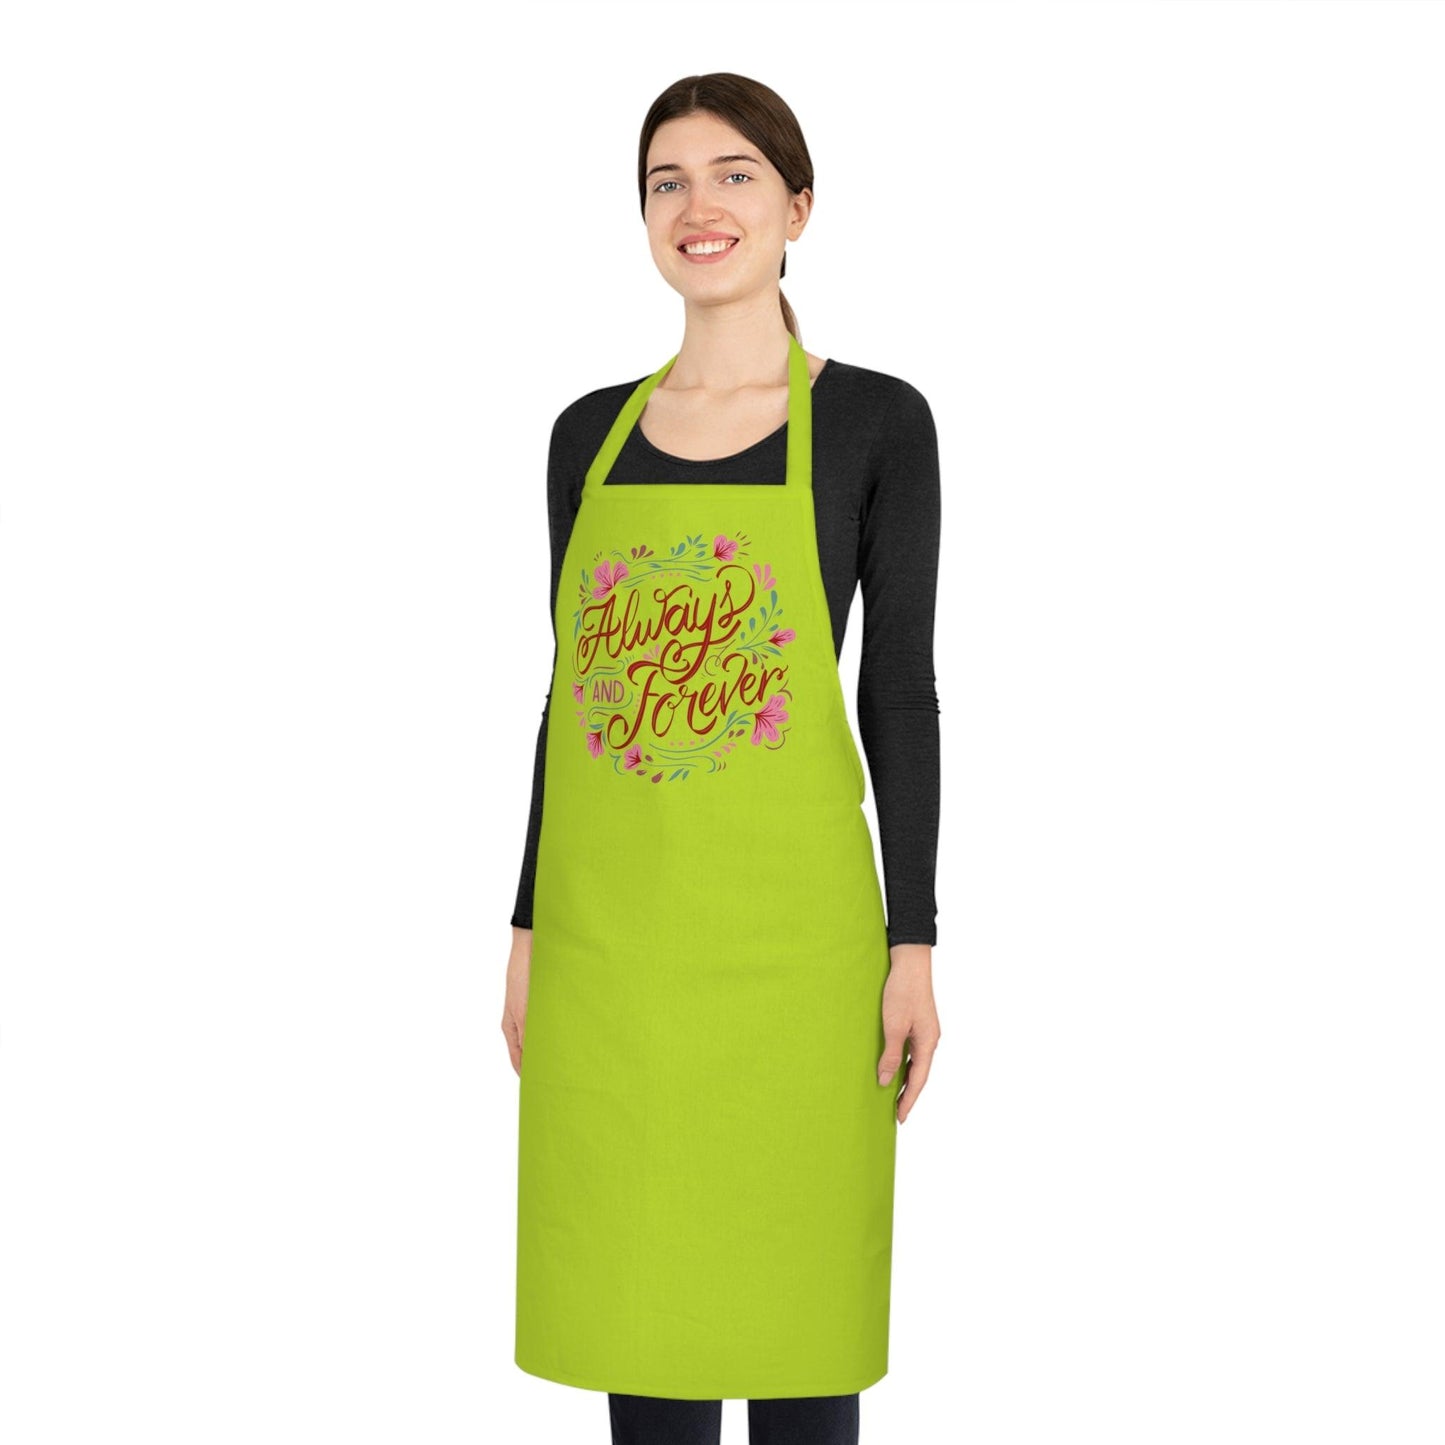 Floral Adult Cooking BBQ Apron - COFFEEBRE